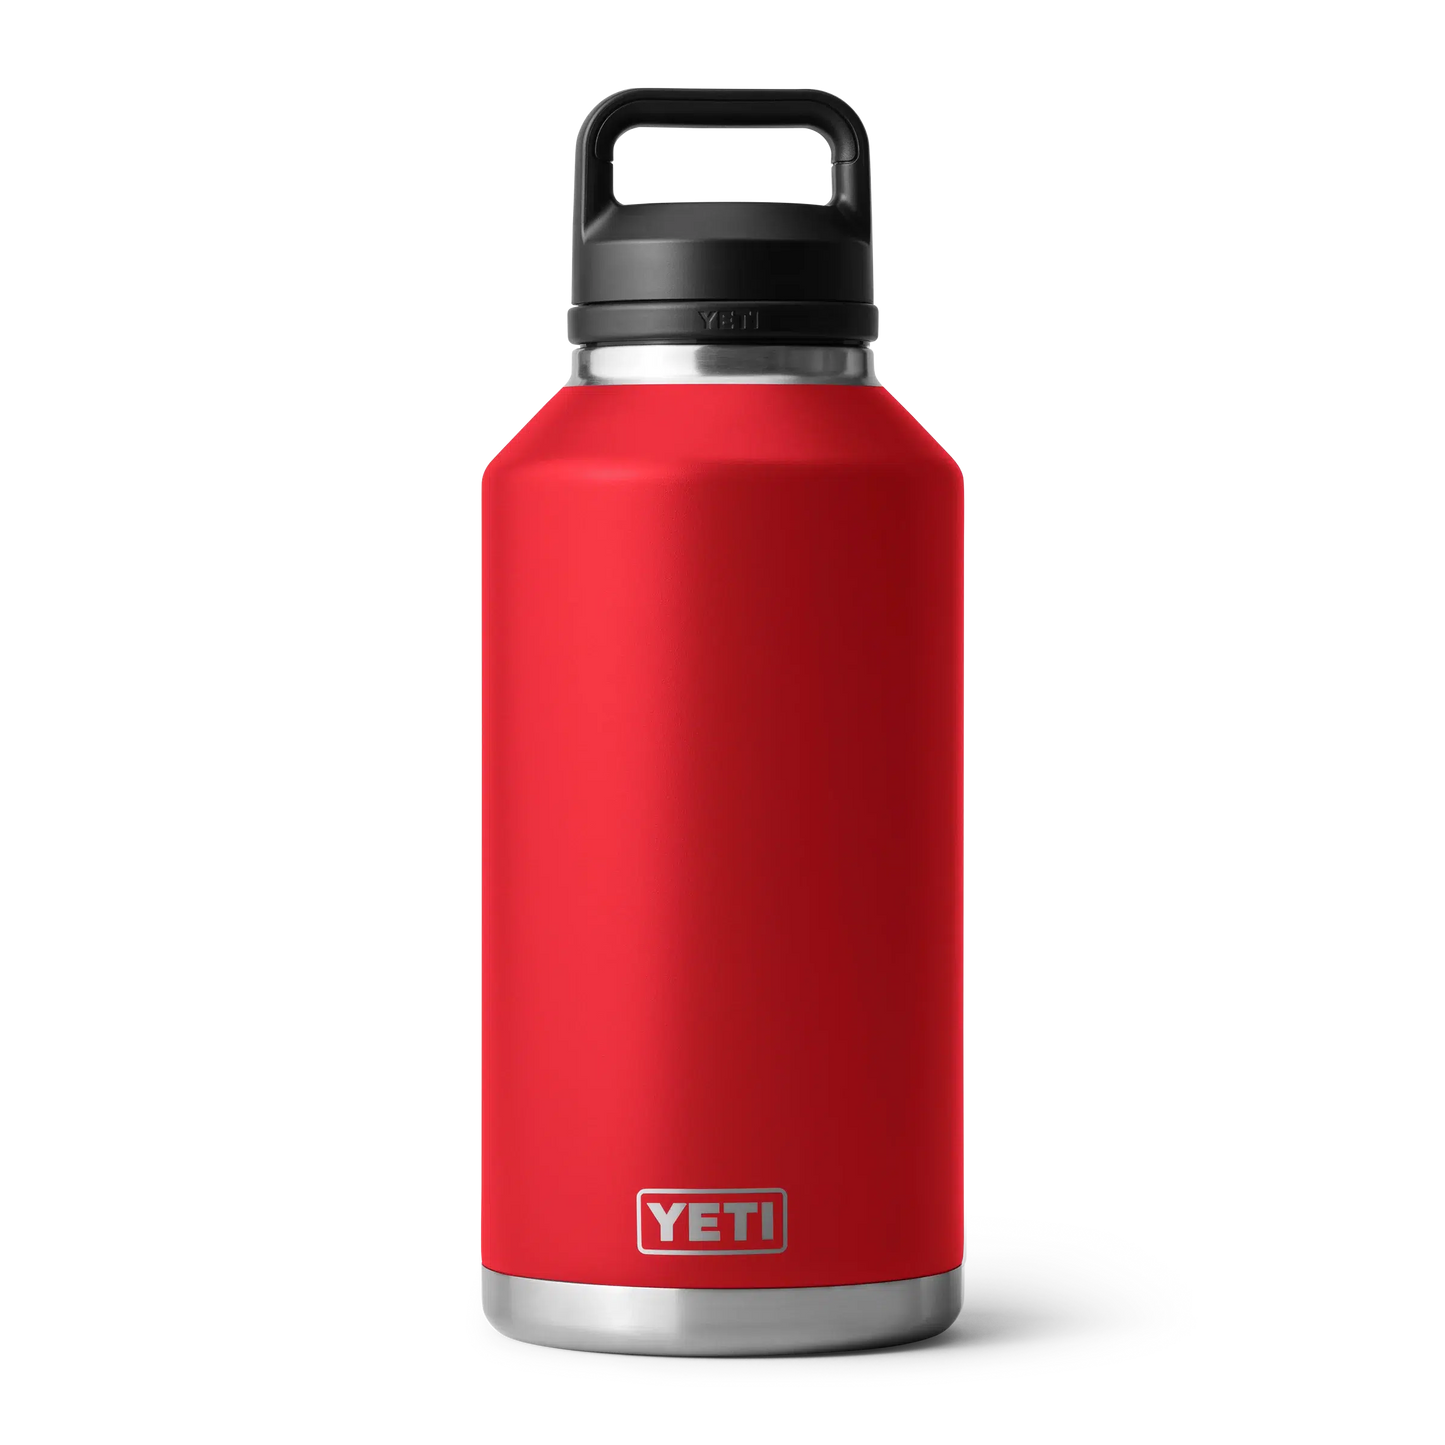 Yeti Rambler 64oz (1.89L) Reusable Bottle with Chug Cap-Coolers & Drinkware-Yeti-Rescue Red-Fishing Station